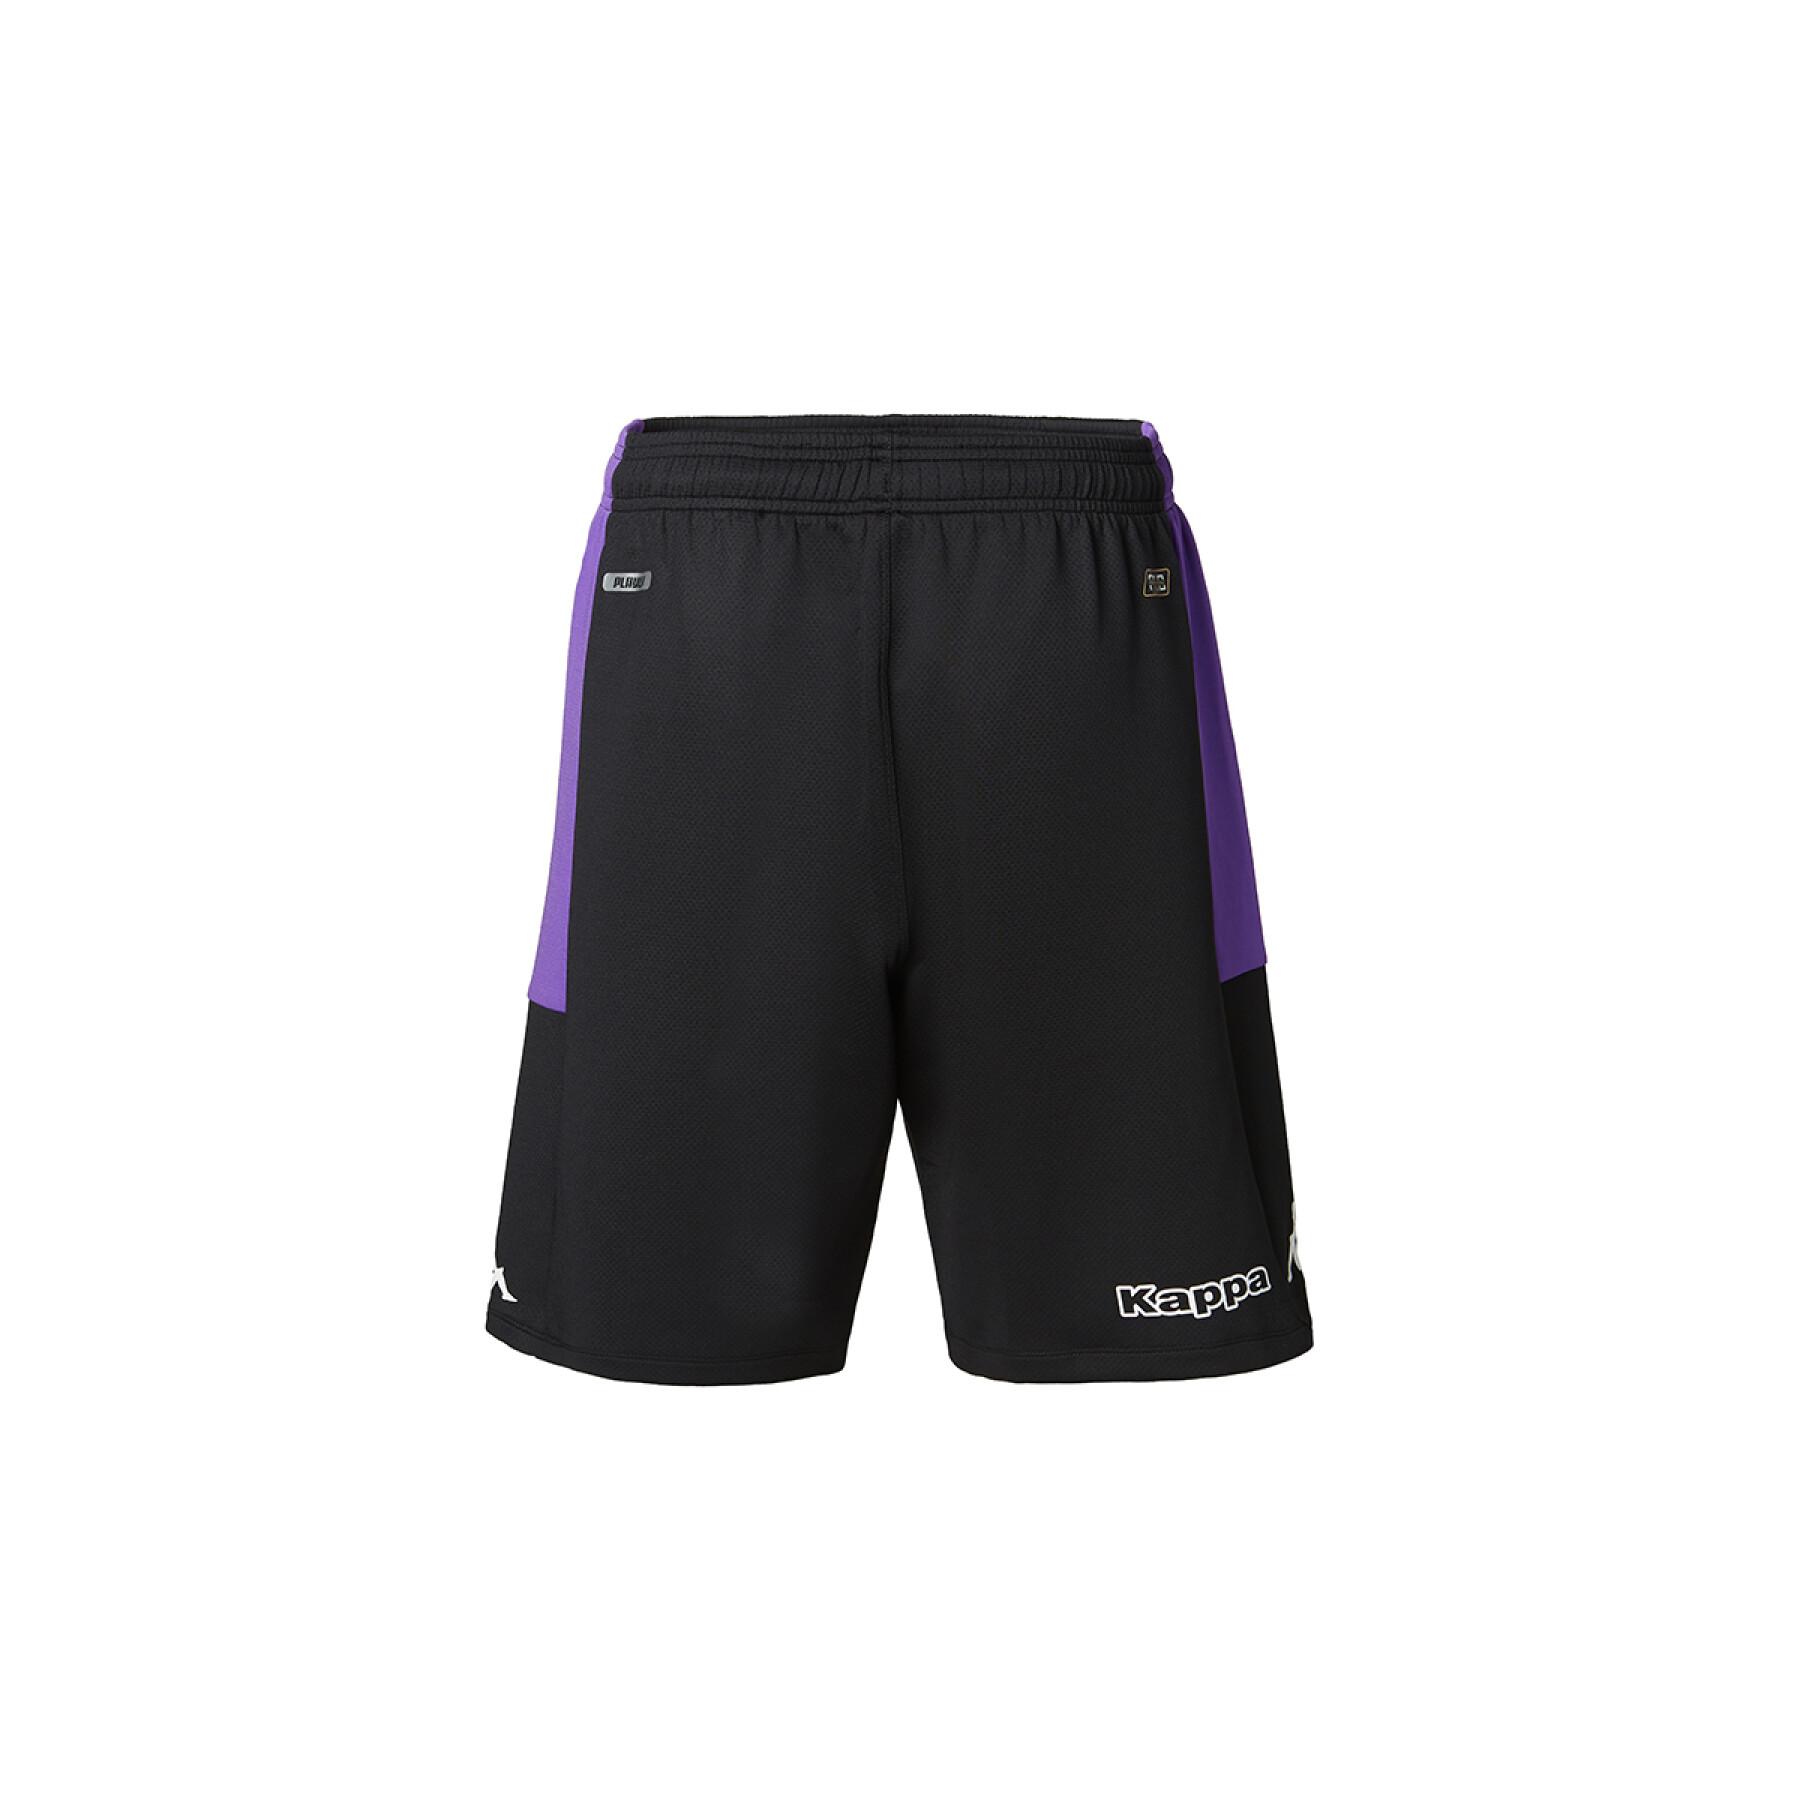 2021 rugby world cup shorts ansaizip pro 5